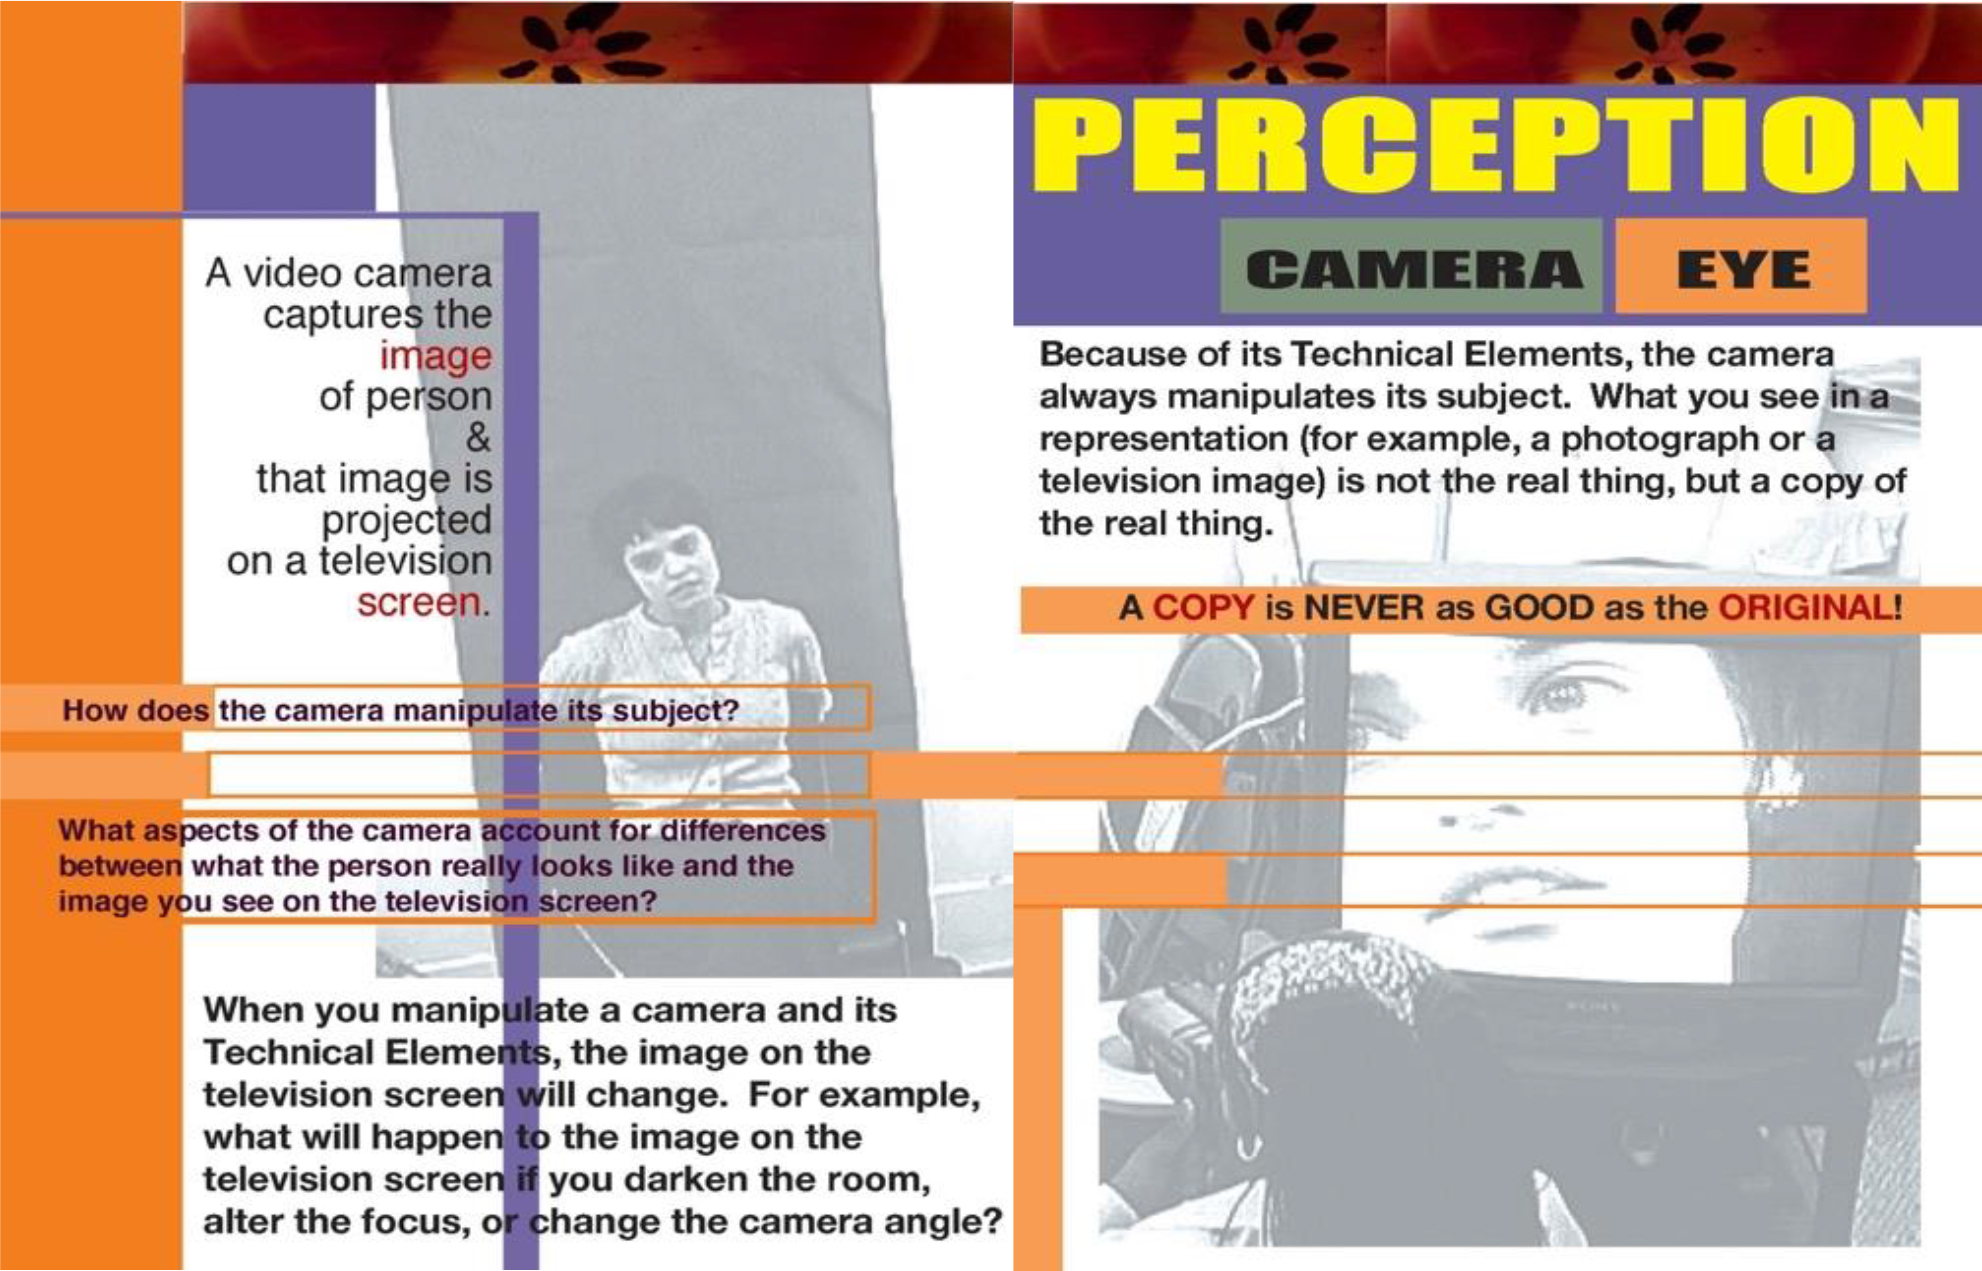 Image: PERCEPTION: CAMERA/EYE Because of its technical elements, the camera always manipulates its subject. What you see in a representation (for example, a photography or a television image) is not the real thing, but a copy of the real thing.